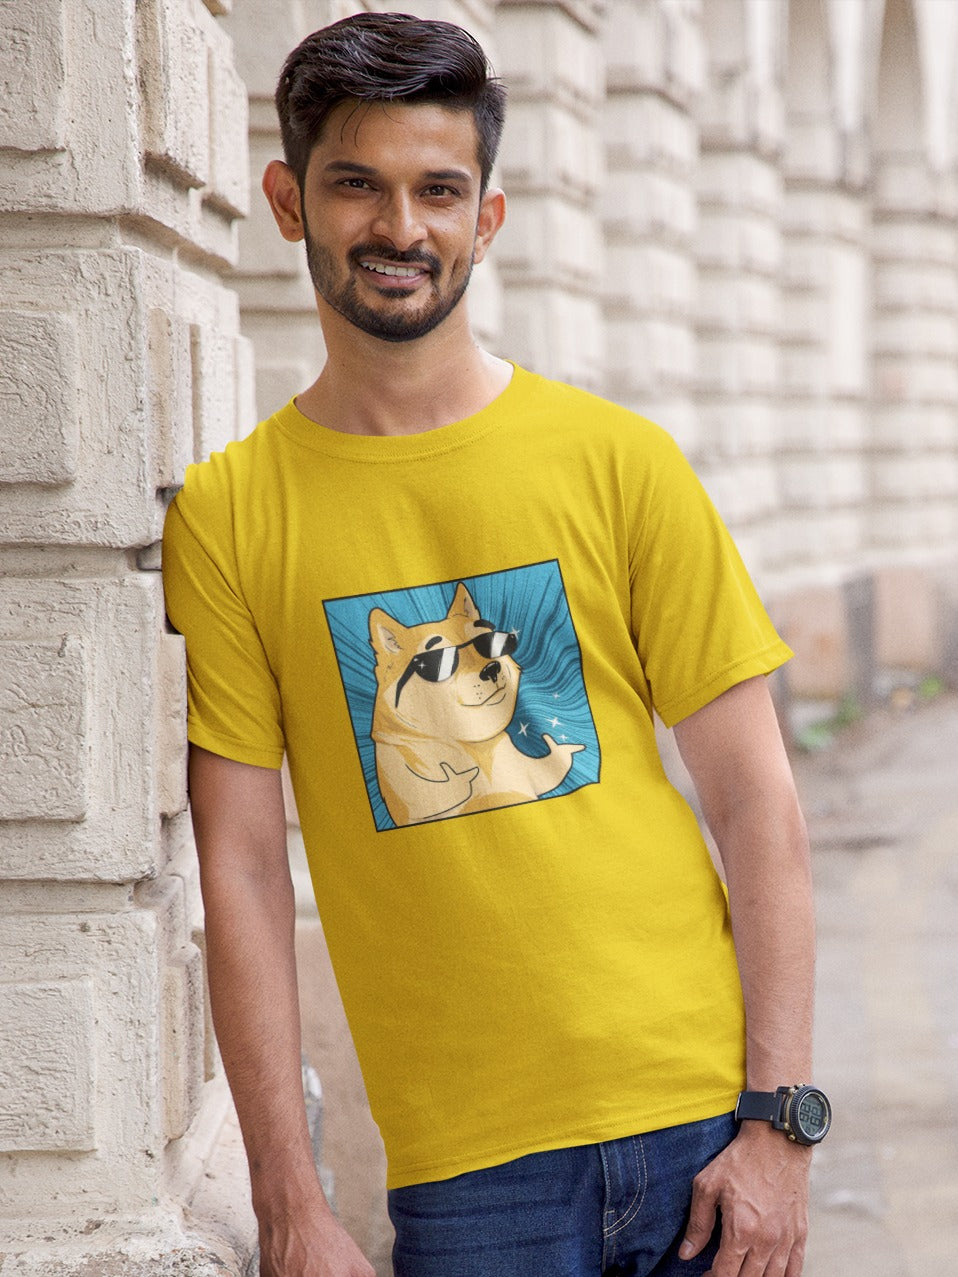 lightly bearded man standing against a wall wearing a yellow tshirt with a shiba inu wearing black shadesin a cool pose with both thumbs pointing forward printed on it, swagger funny memes